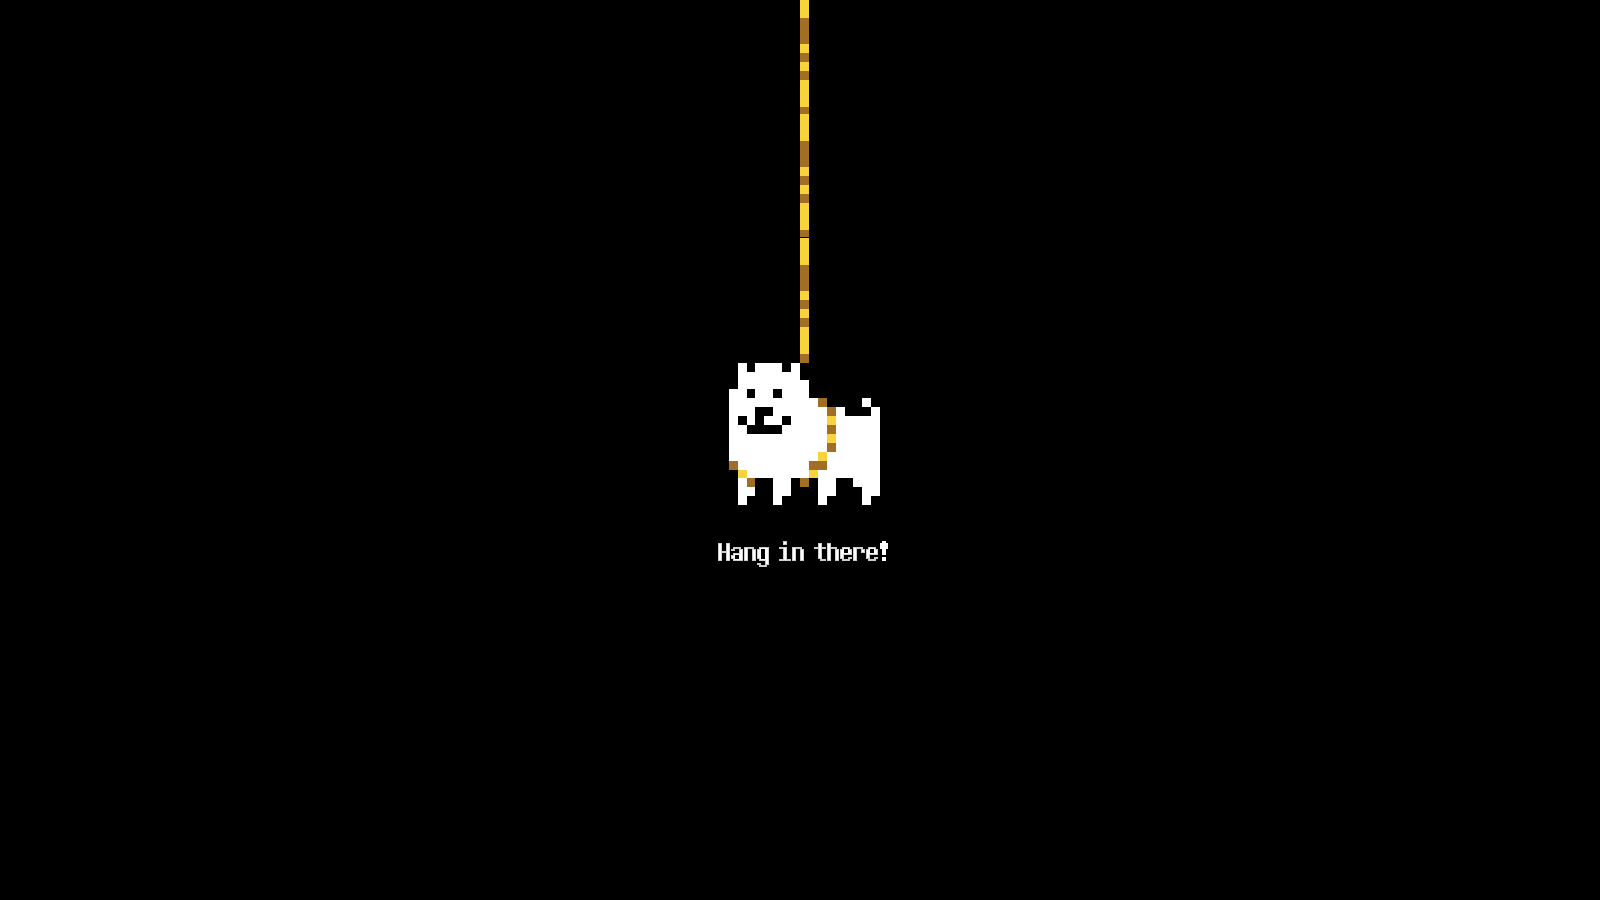 Couldn't find a wallpaper with the tied up dog so I made one myself.: Undertale